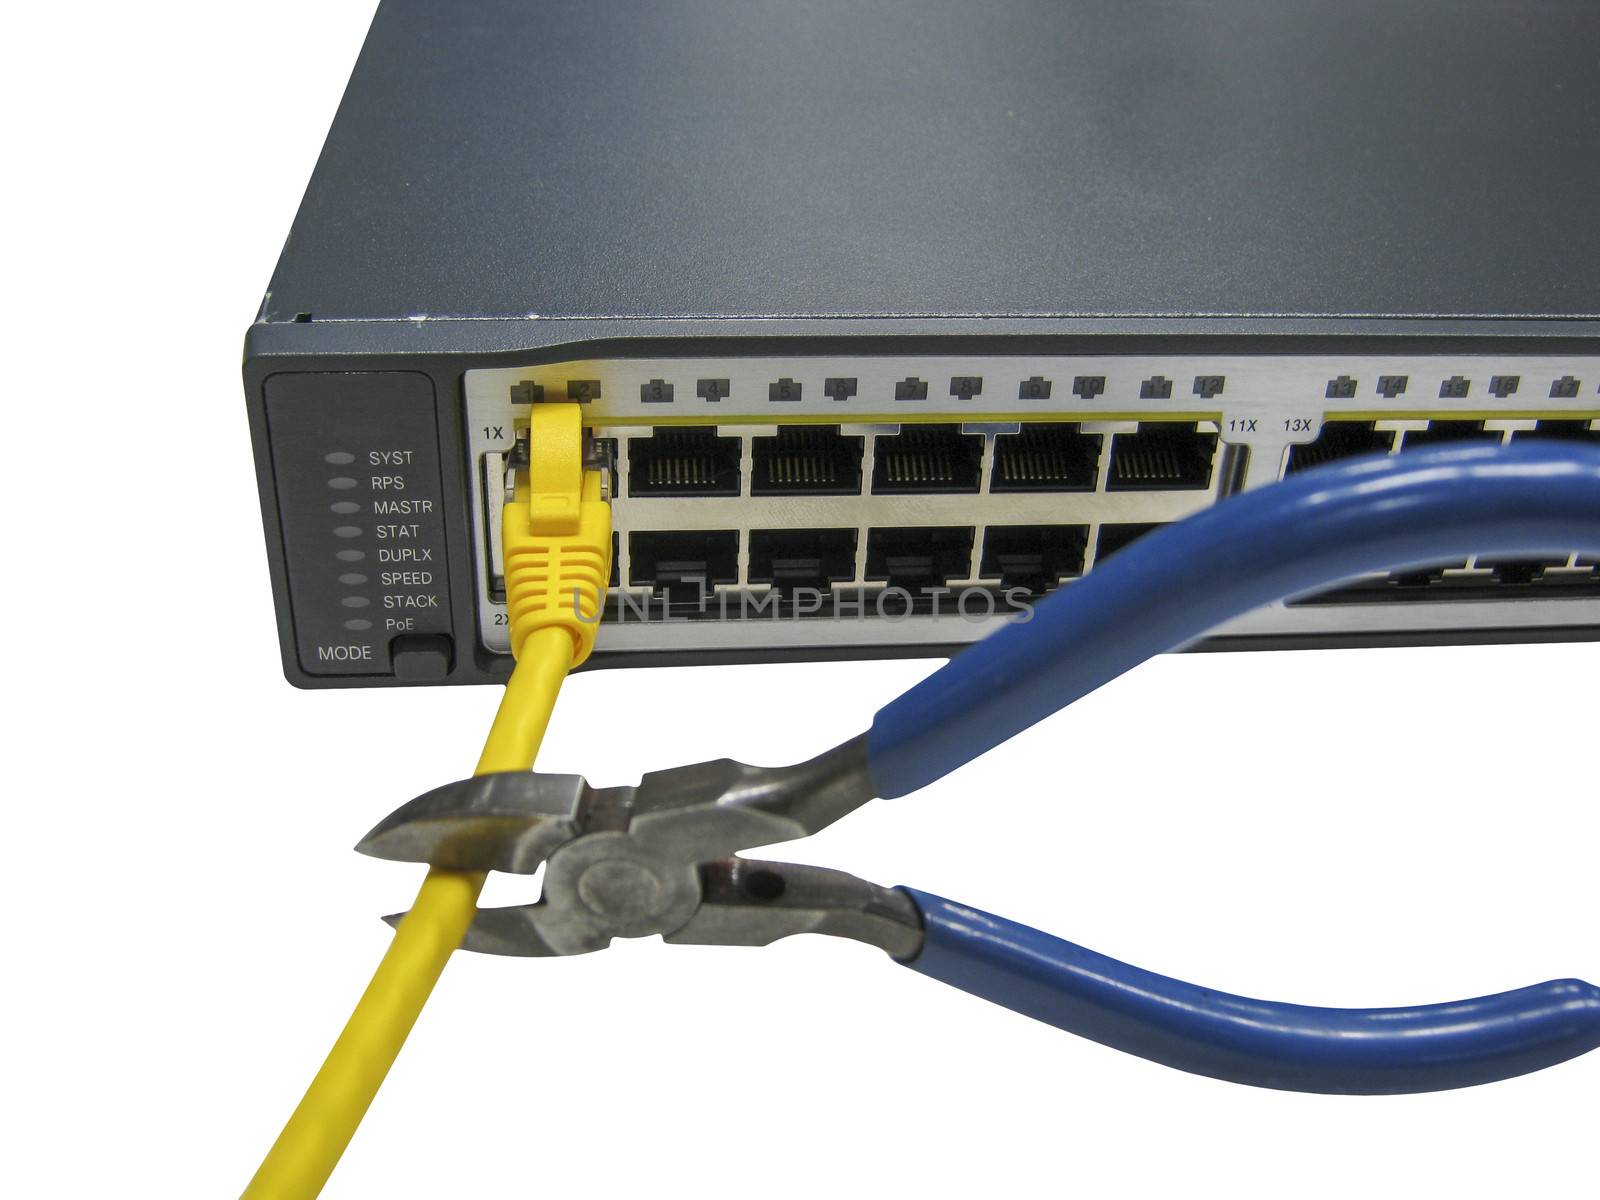 Cut ethernet cables connected to servers on white background